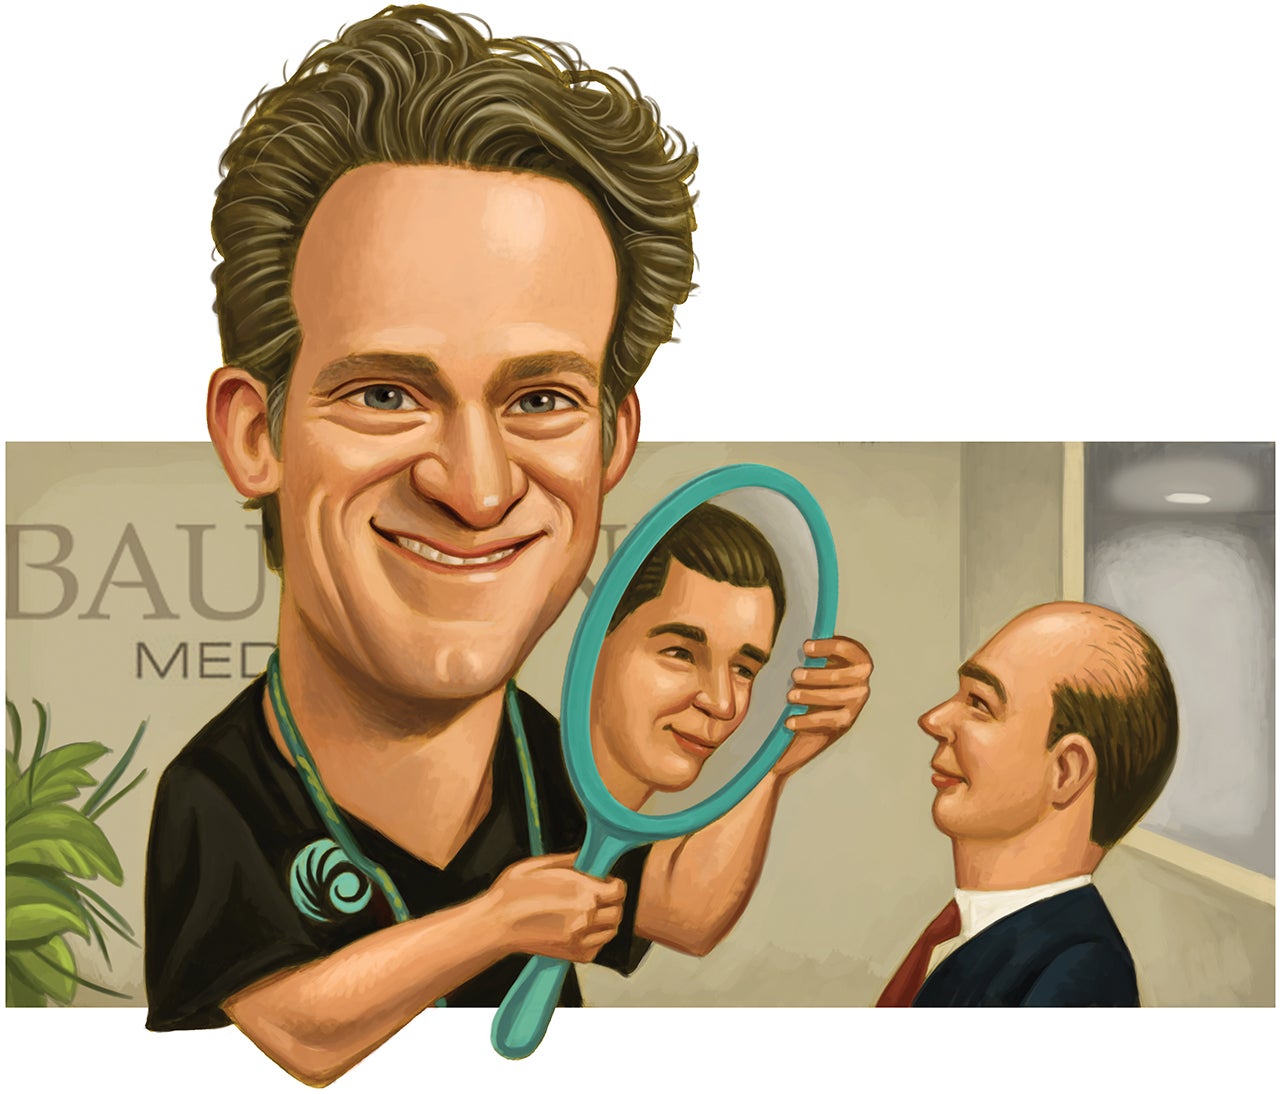 Illustration of Alan Bauman holding a mirror to a man, the reflection showing him with hair.